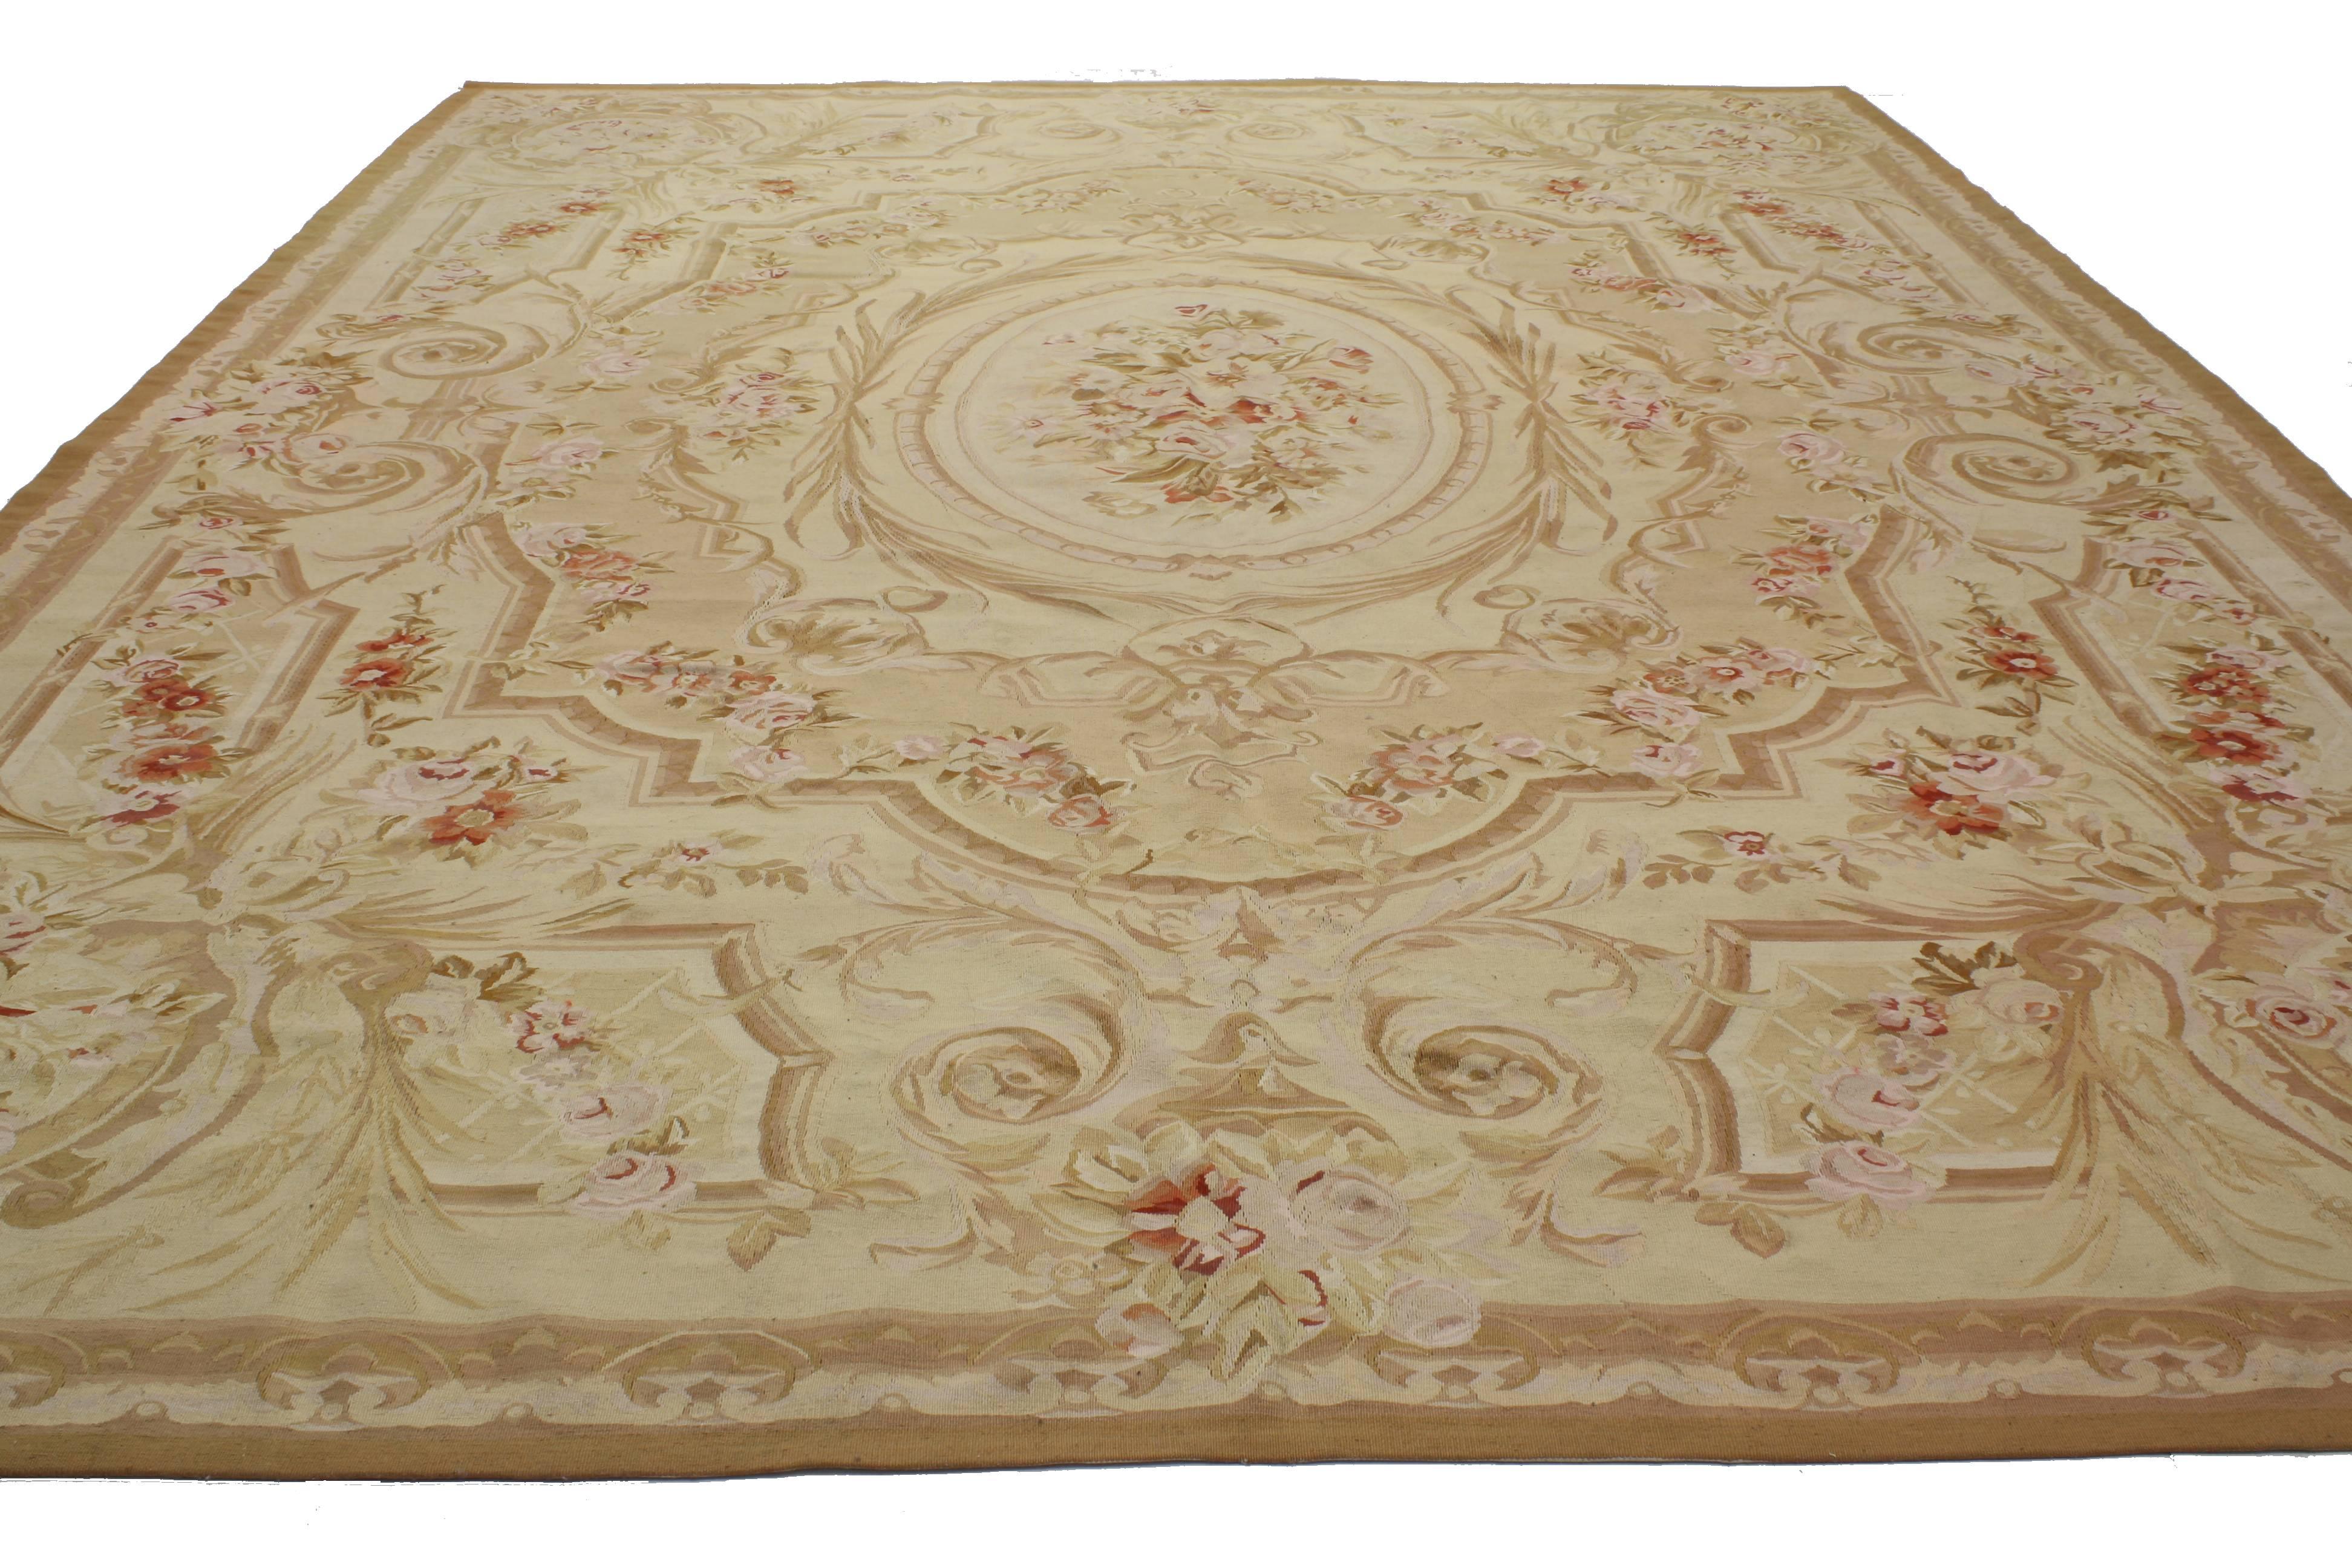 76871 Vintage Aubusson Chinese Area Rug with French Chintz Style 10'06 x 13'06. Drawing inspiration from Mario Buatta, Chintz style and design elements from the 18th century in France, this vintage Chinese Aubusson style rug will make a grand